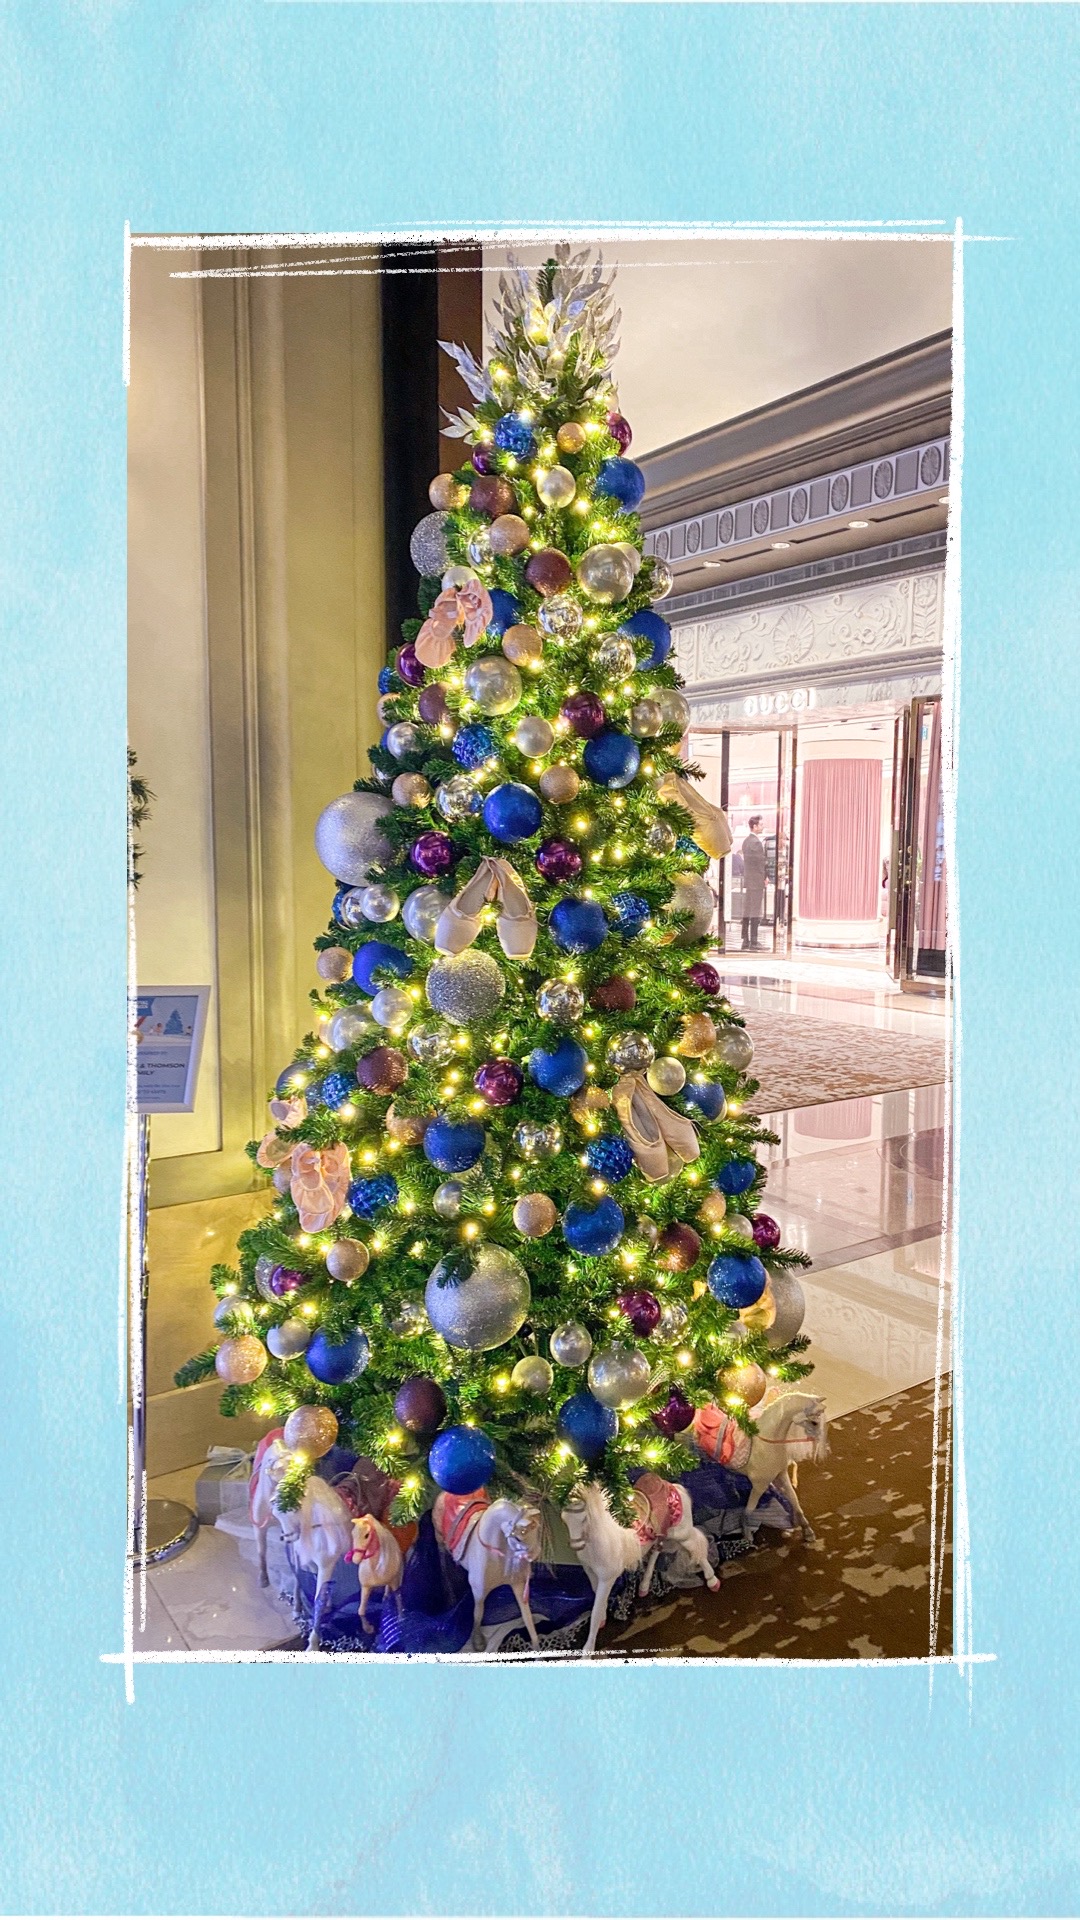 A holiday tree decorated with blue, purple, and silver ornaments for the BCCHF Festival of Trees